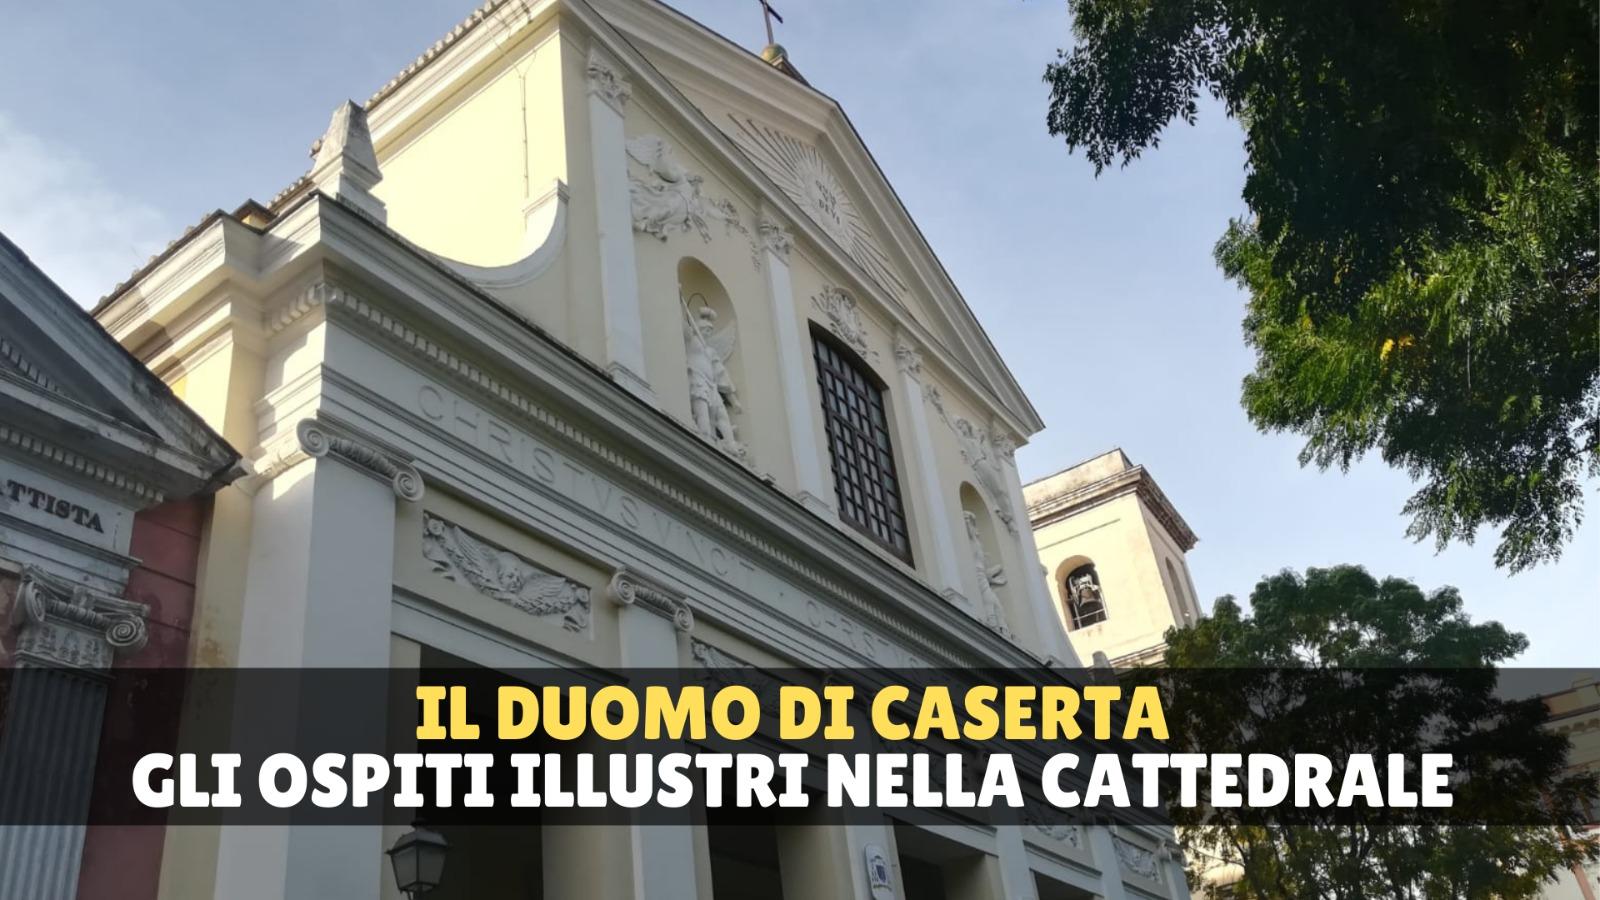 The cathedral of Caserta: a tormented history